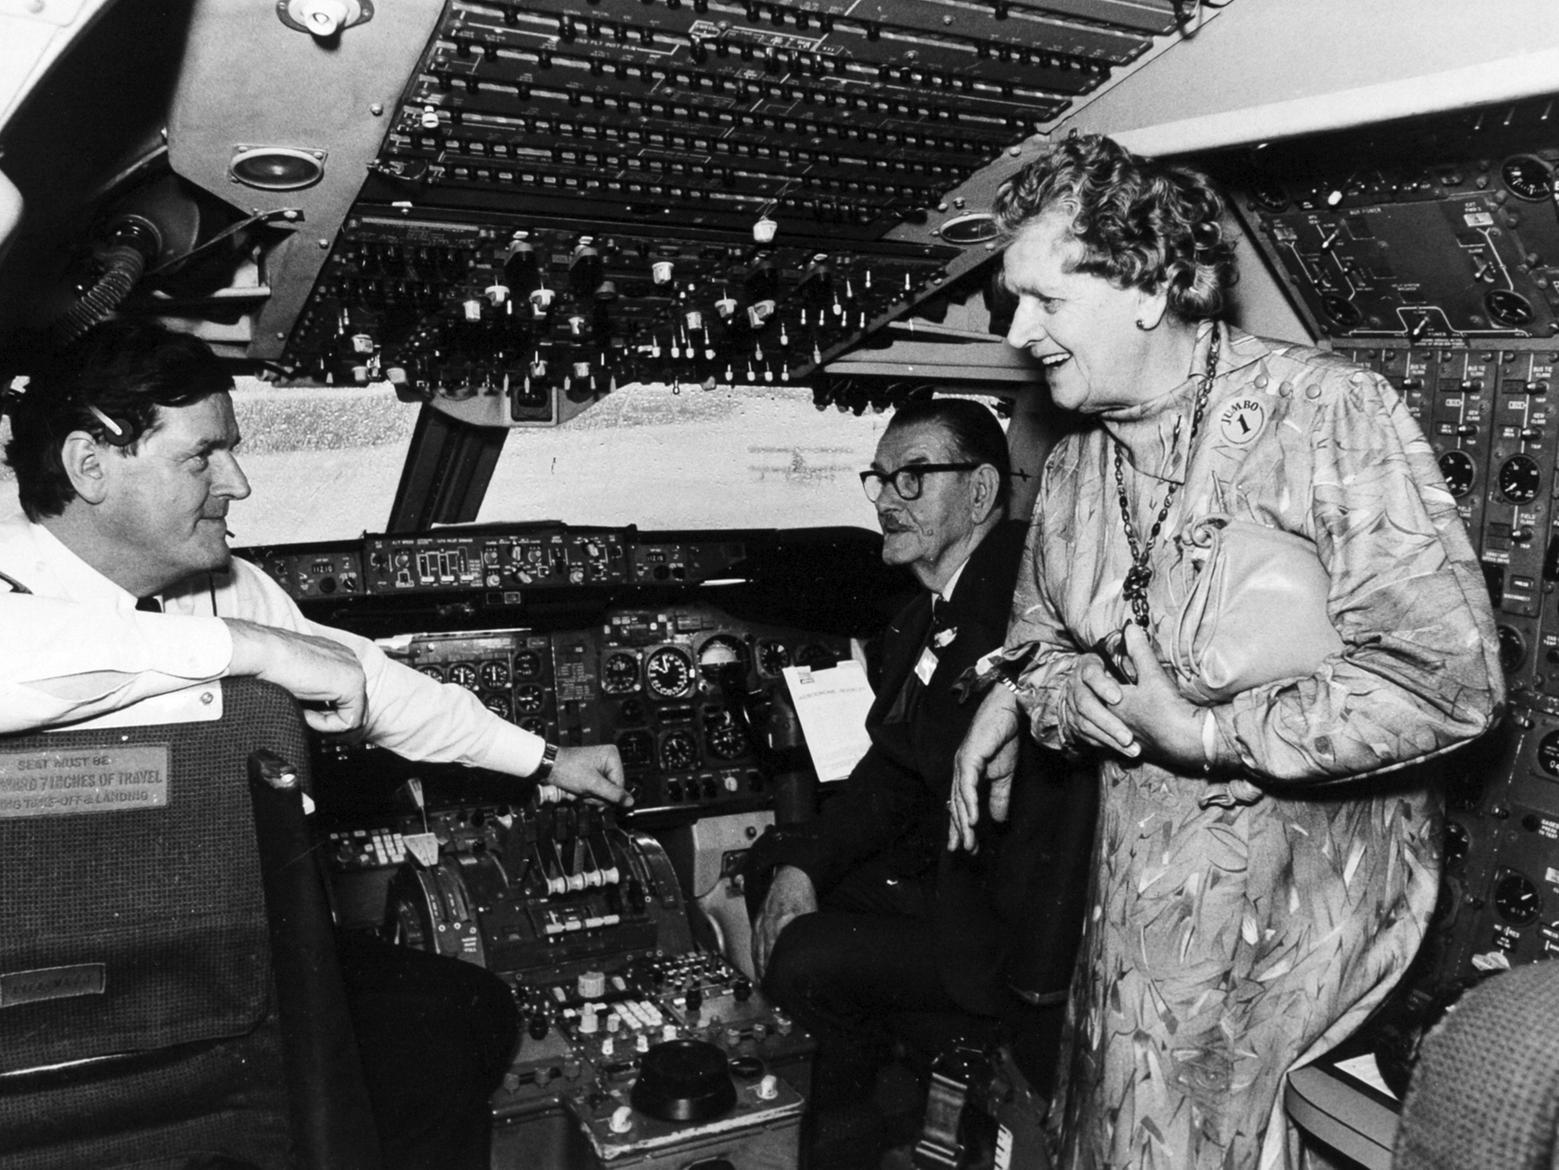 Captain Mike Webster shows his parents, William and Norah Webster, the flight deck of the Jumbo. There were cheers from the 400 passengers as it lifted into the air to become the first Jumbo to take off from Leeds Bradford Airport.